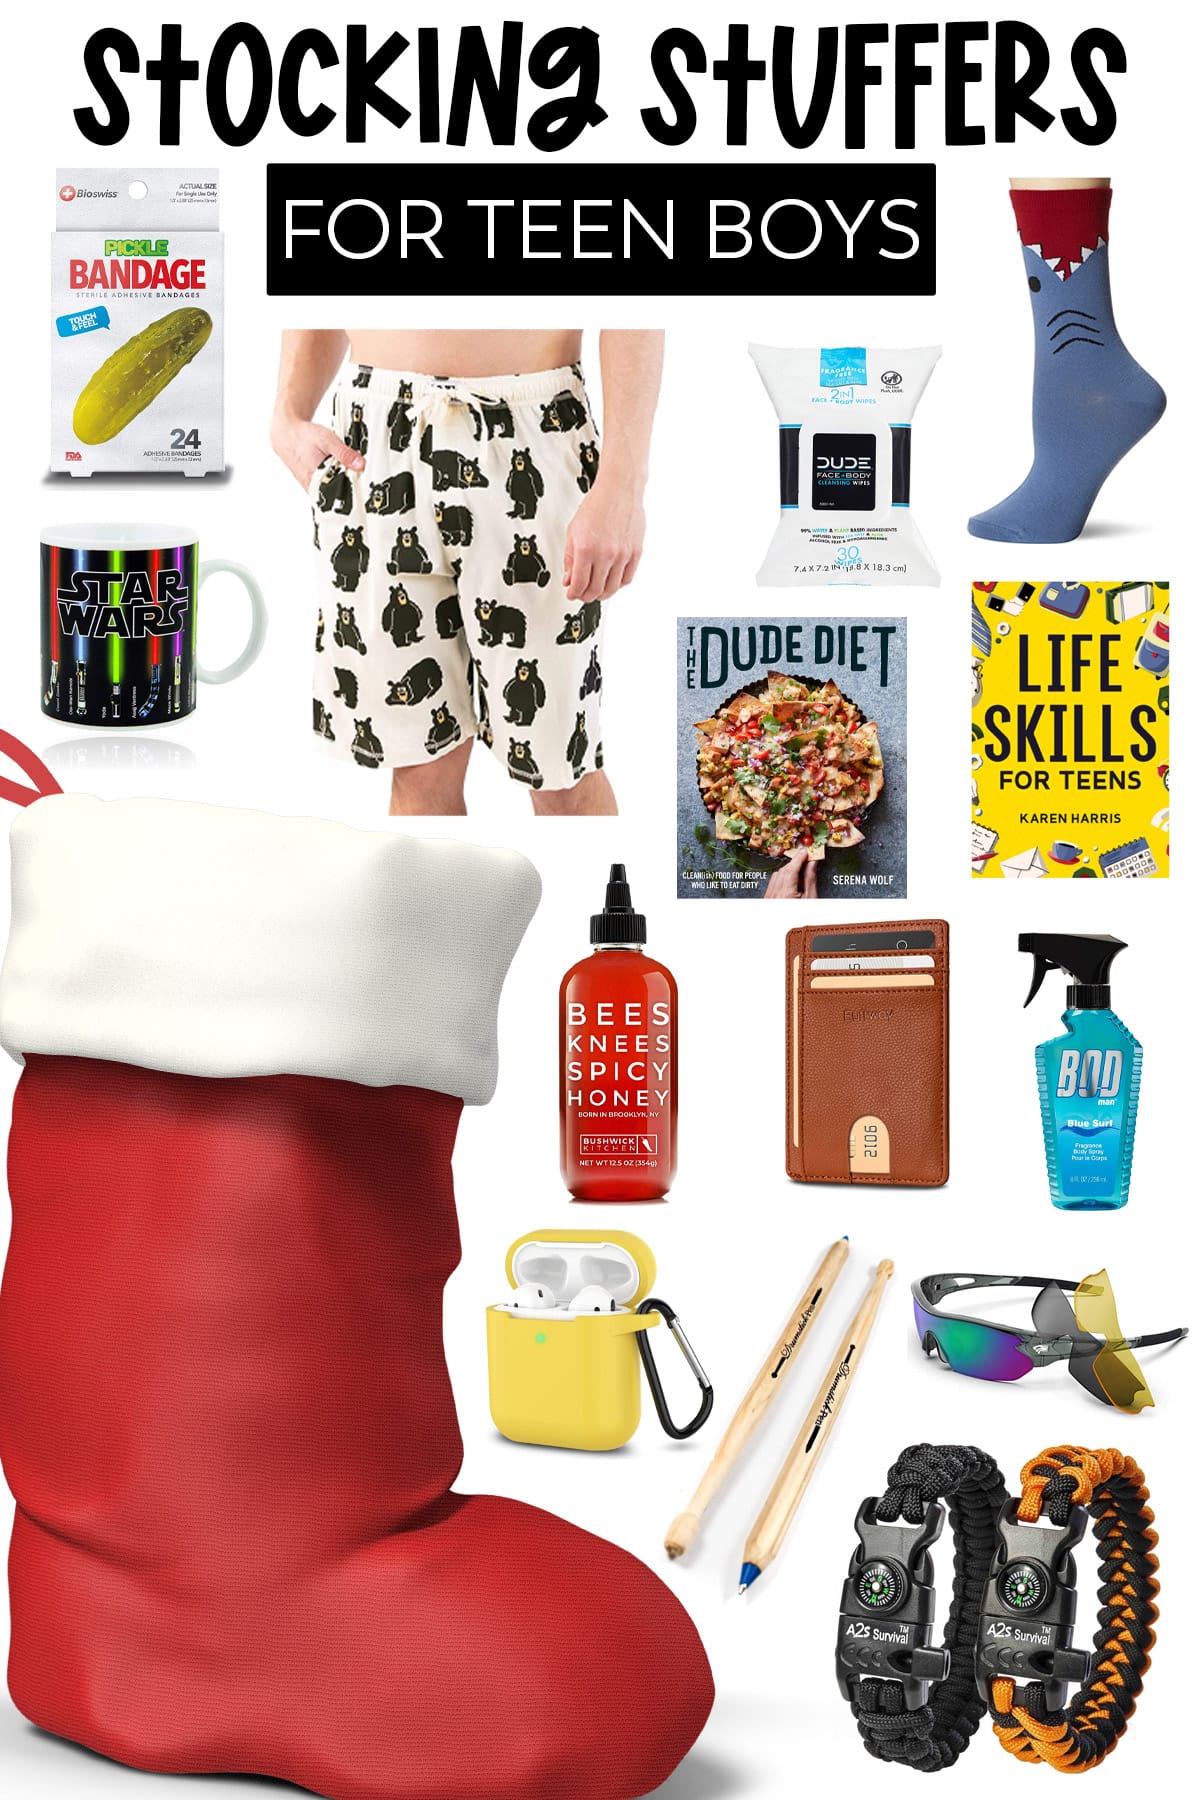 All the Coolest Stocking Stuffers for Teen Girls